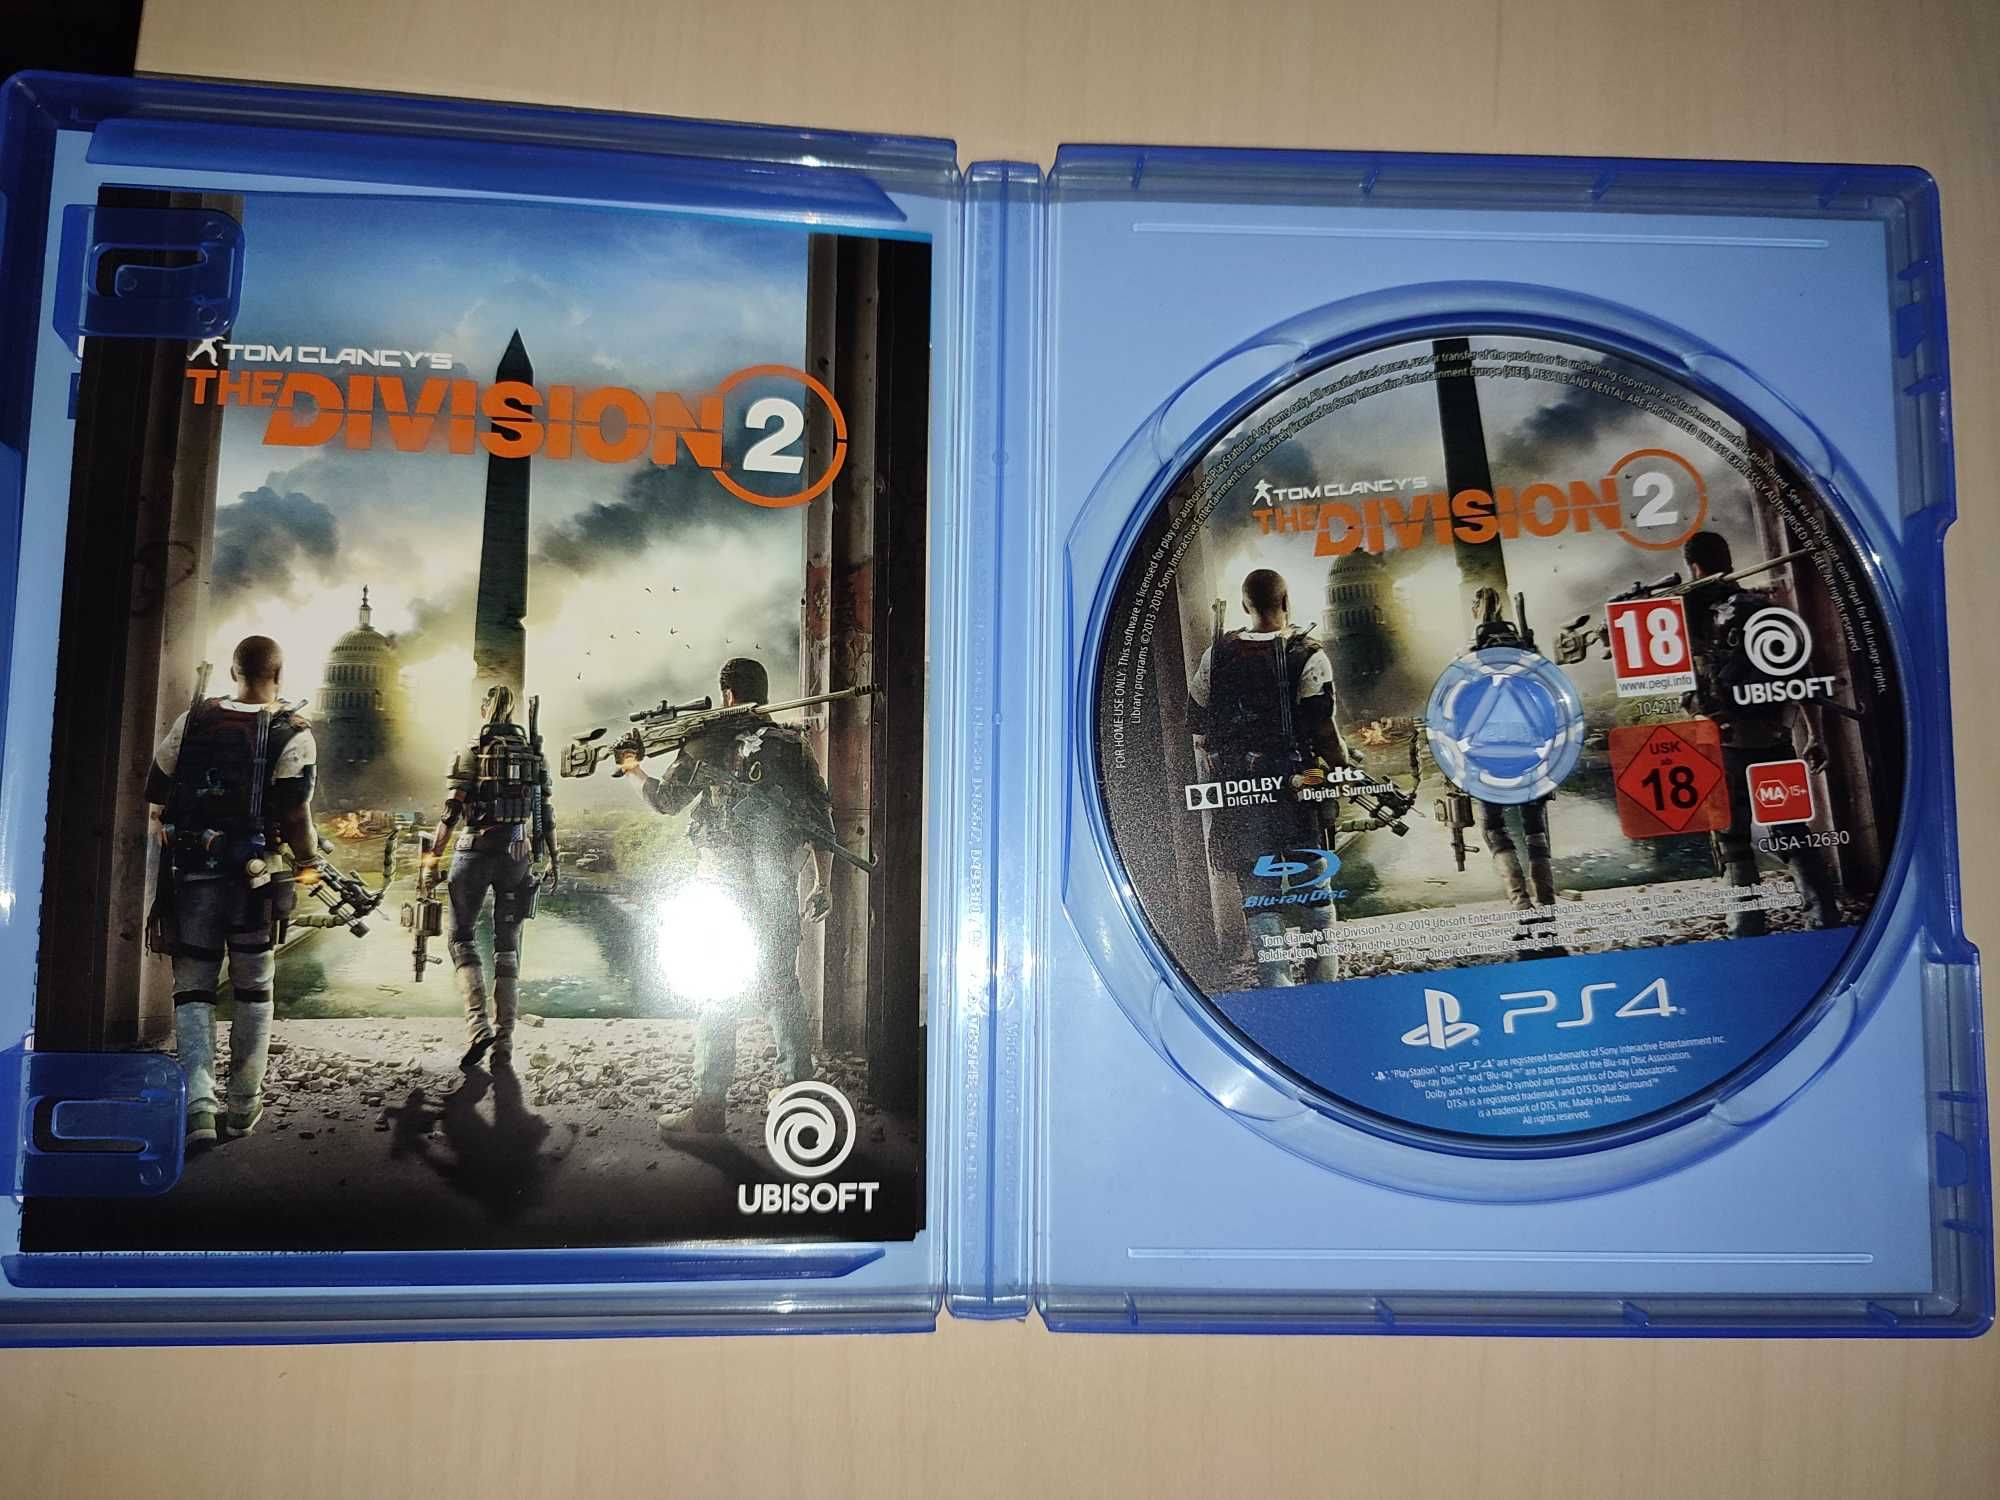 The division 2 ps4